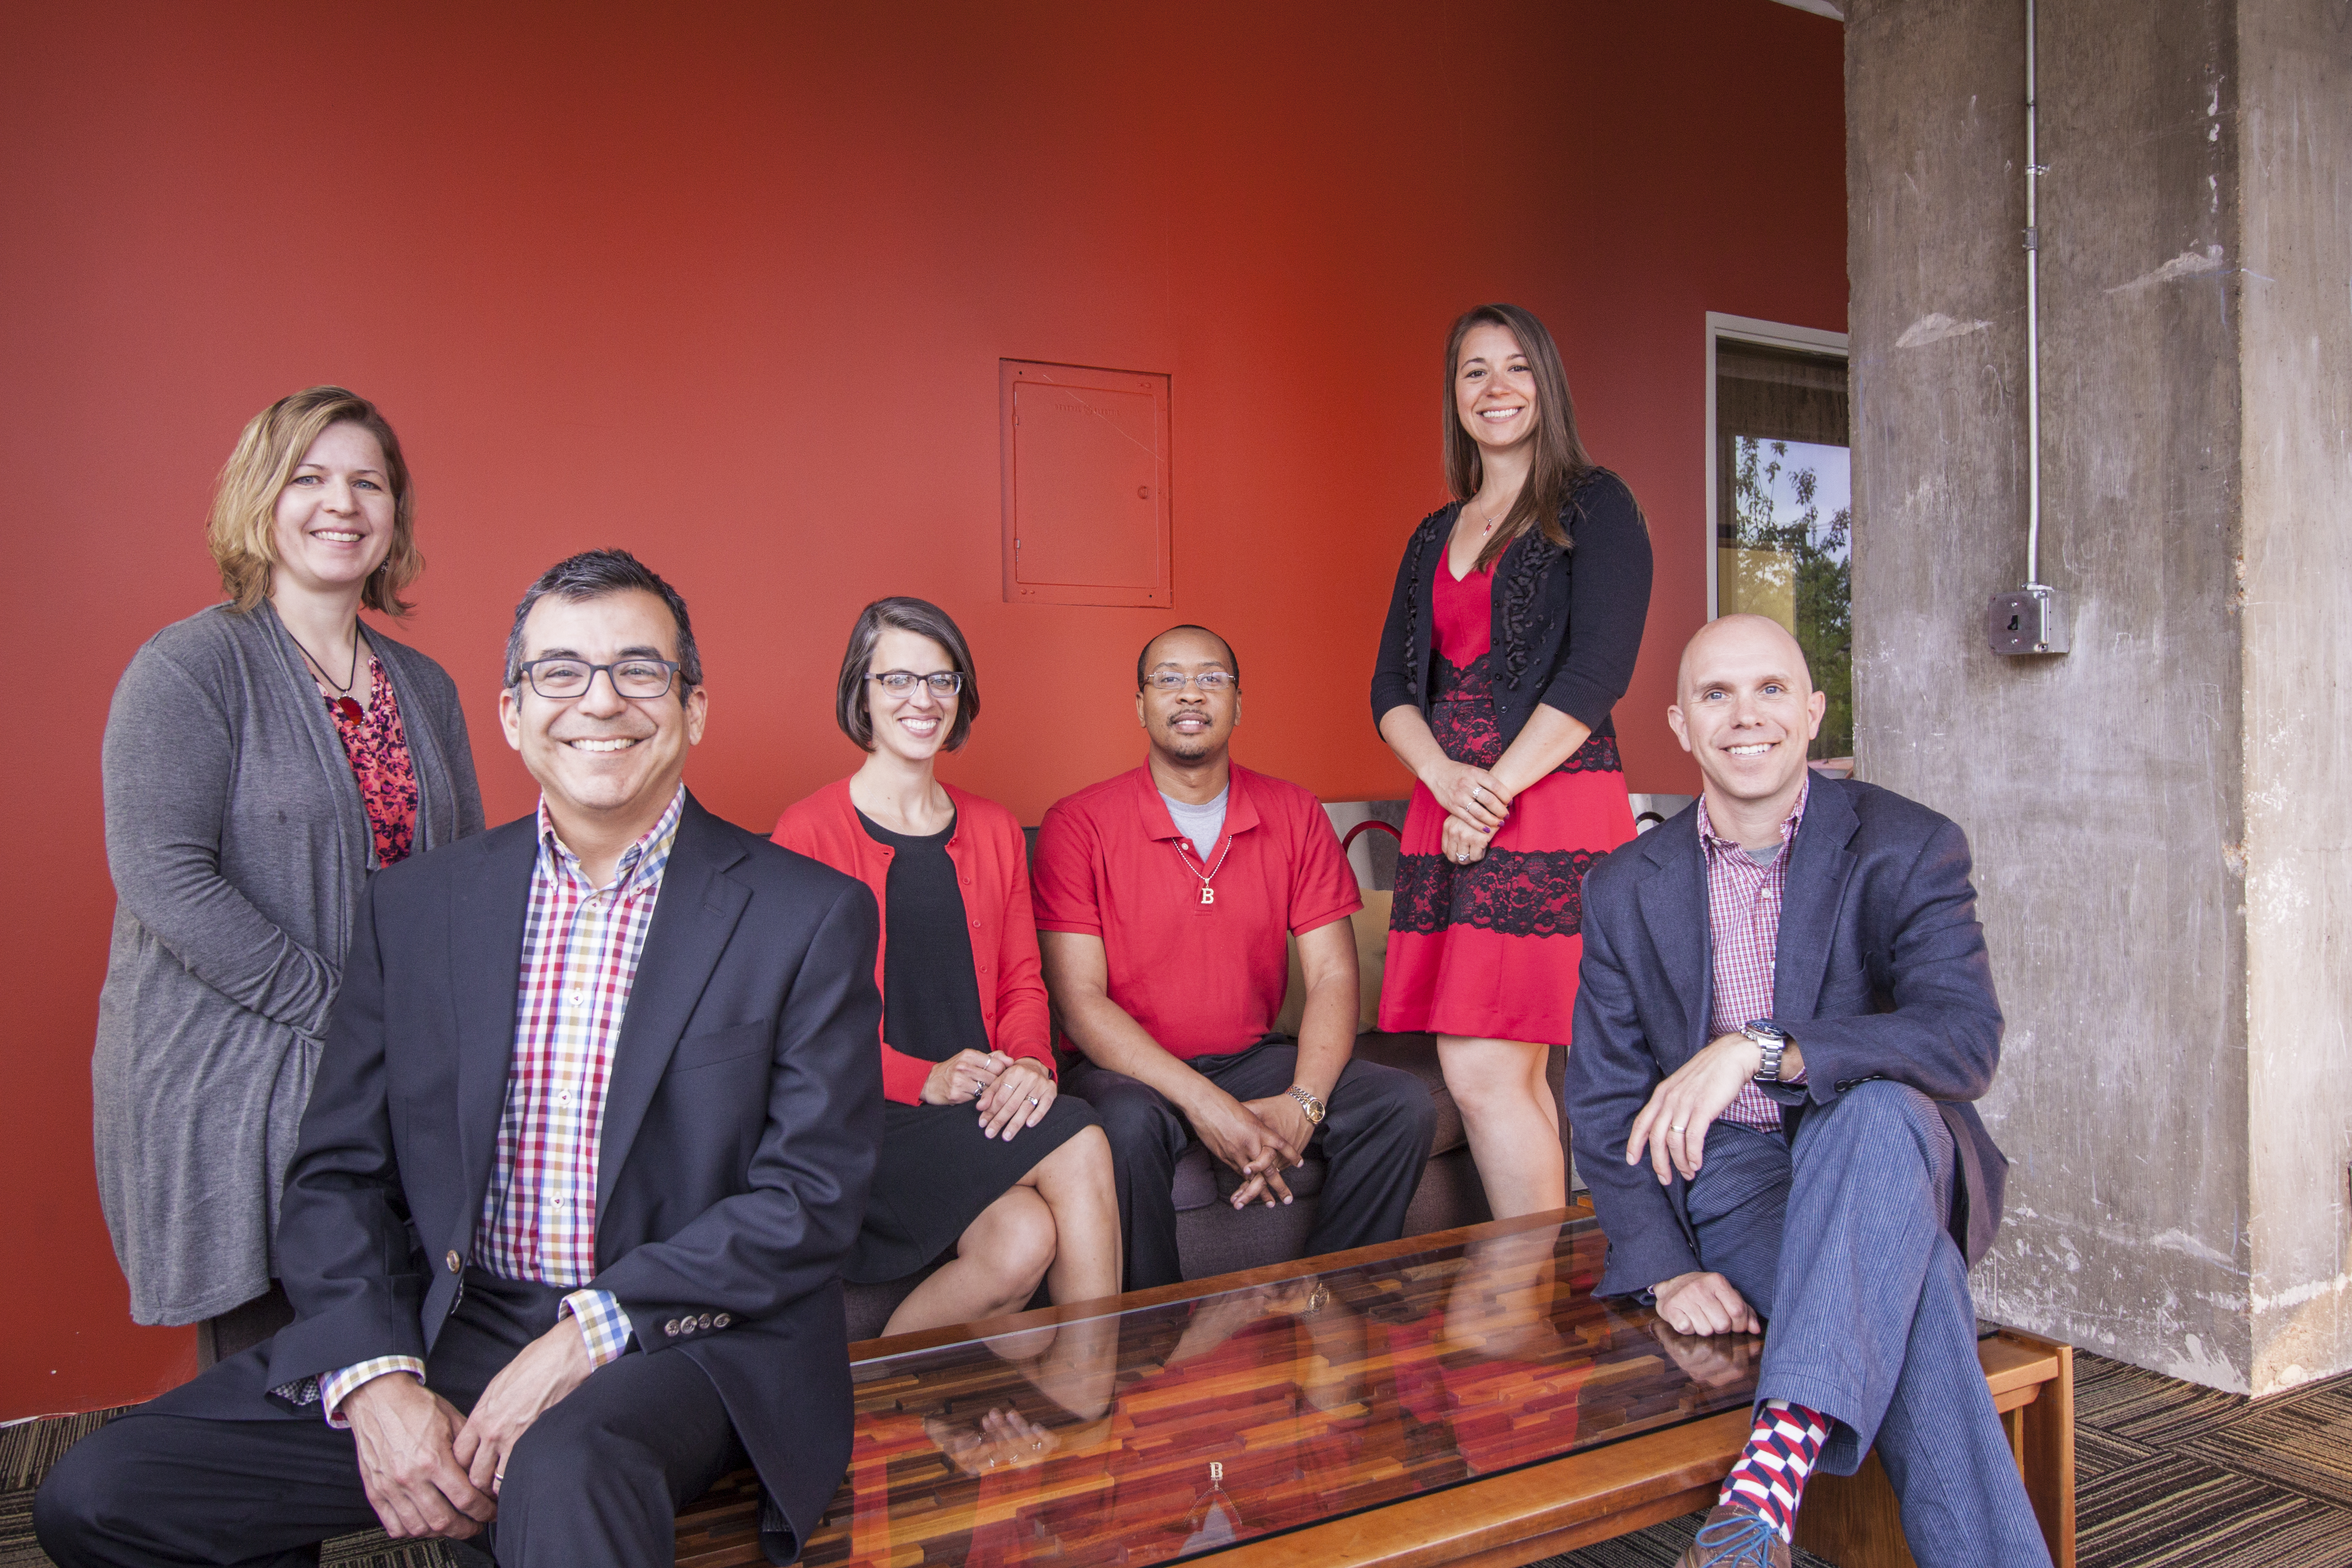 The CORE10 Architecture team includes (from left to right): Sheila Miranda, Lead Architect; Michael Byrd, Principal and Co-Founder; Amanda Partyka Norris, Lead Architect; Jamar Bohannon, Production Designer; Sheena M. Hartmann, Production Designer; Tyler Stephens, Principal & Co-Founder.